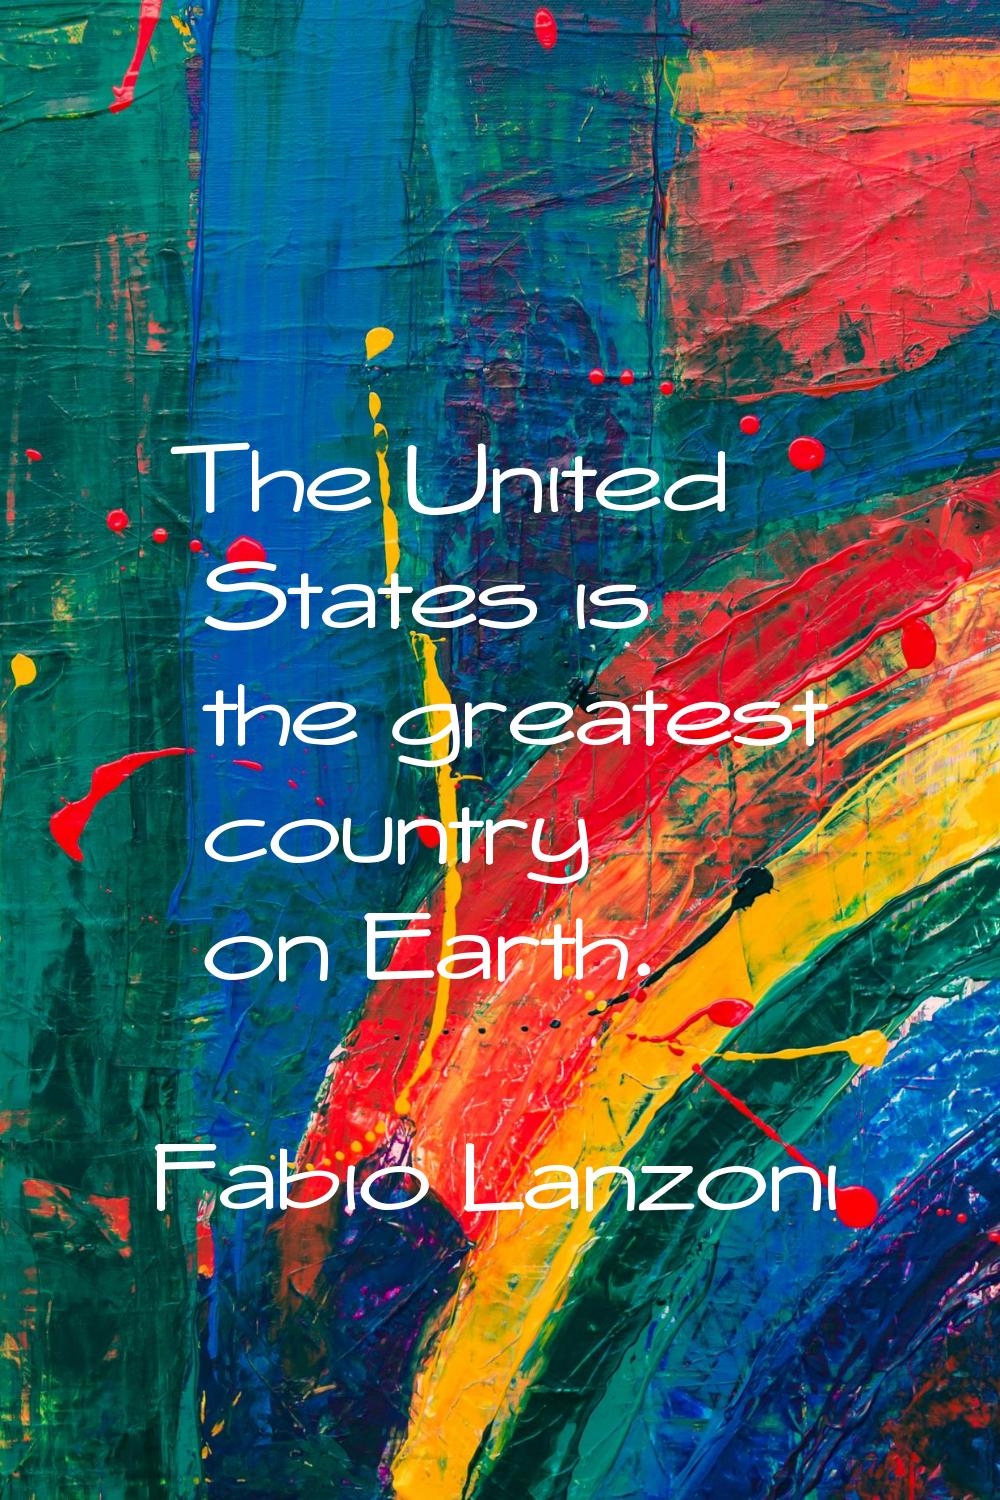 The United States is the greatest country on Earth.